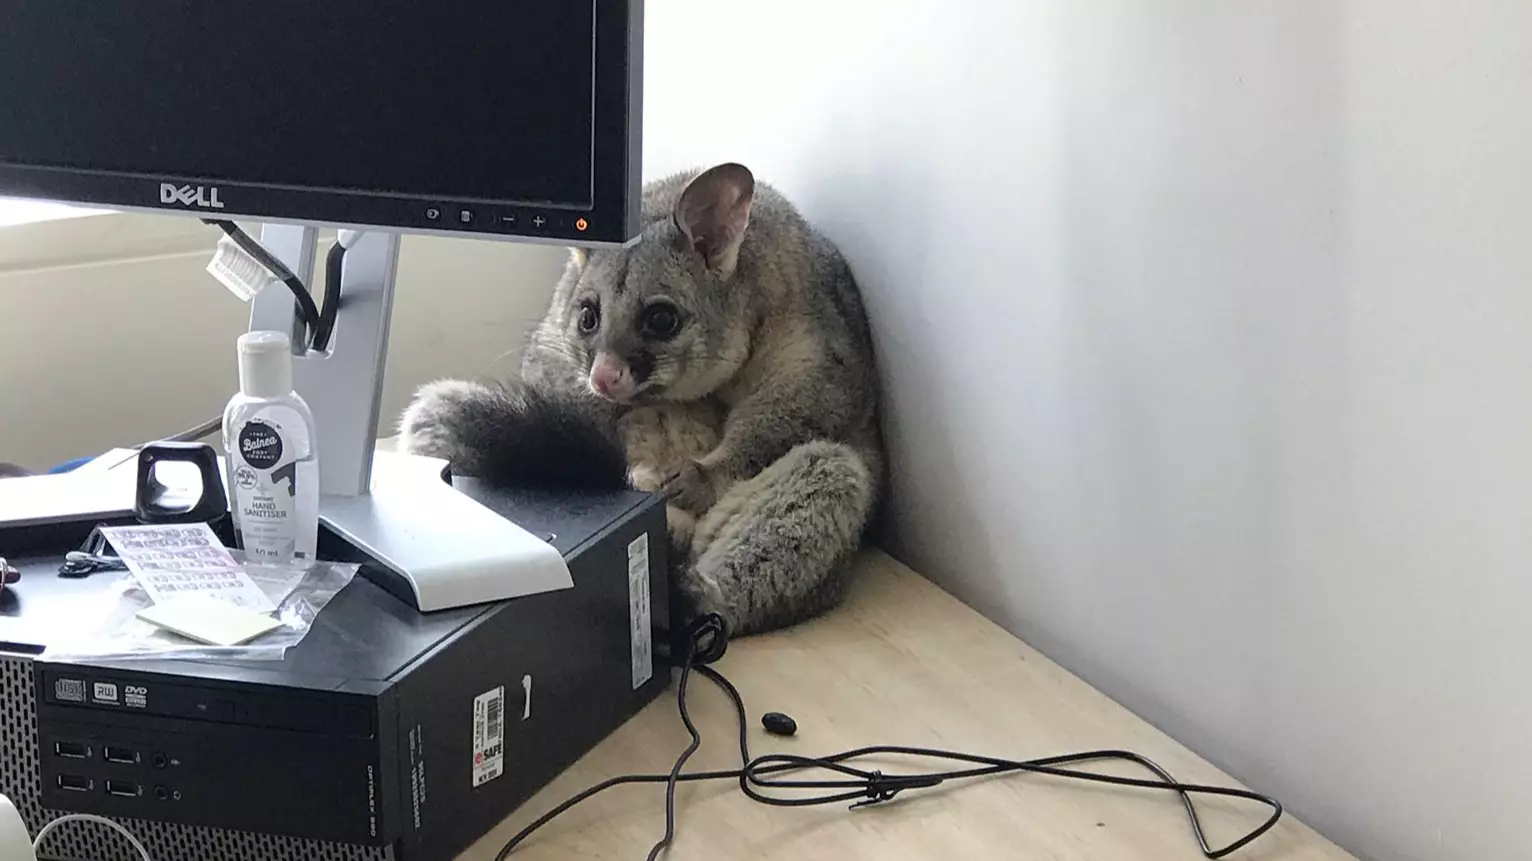 Pesky Possum Trashes Office Before Hiding Behind Computer And Looking Remorseful 